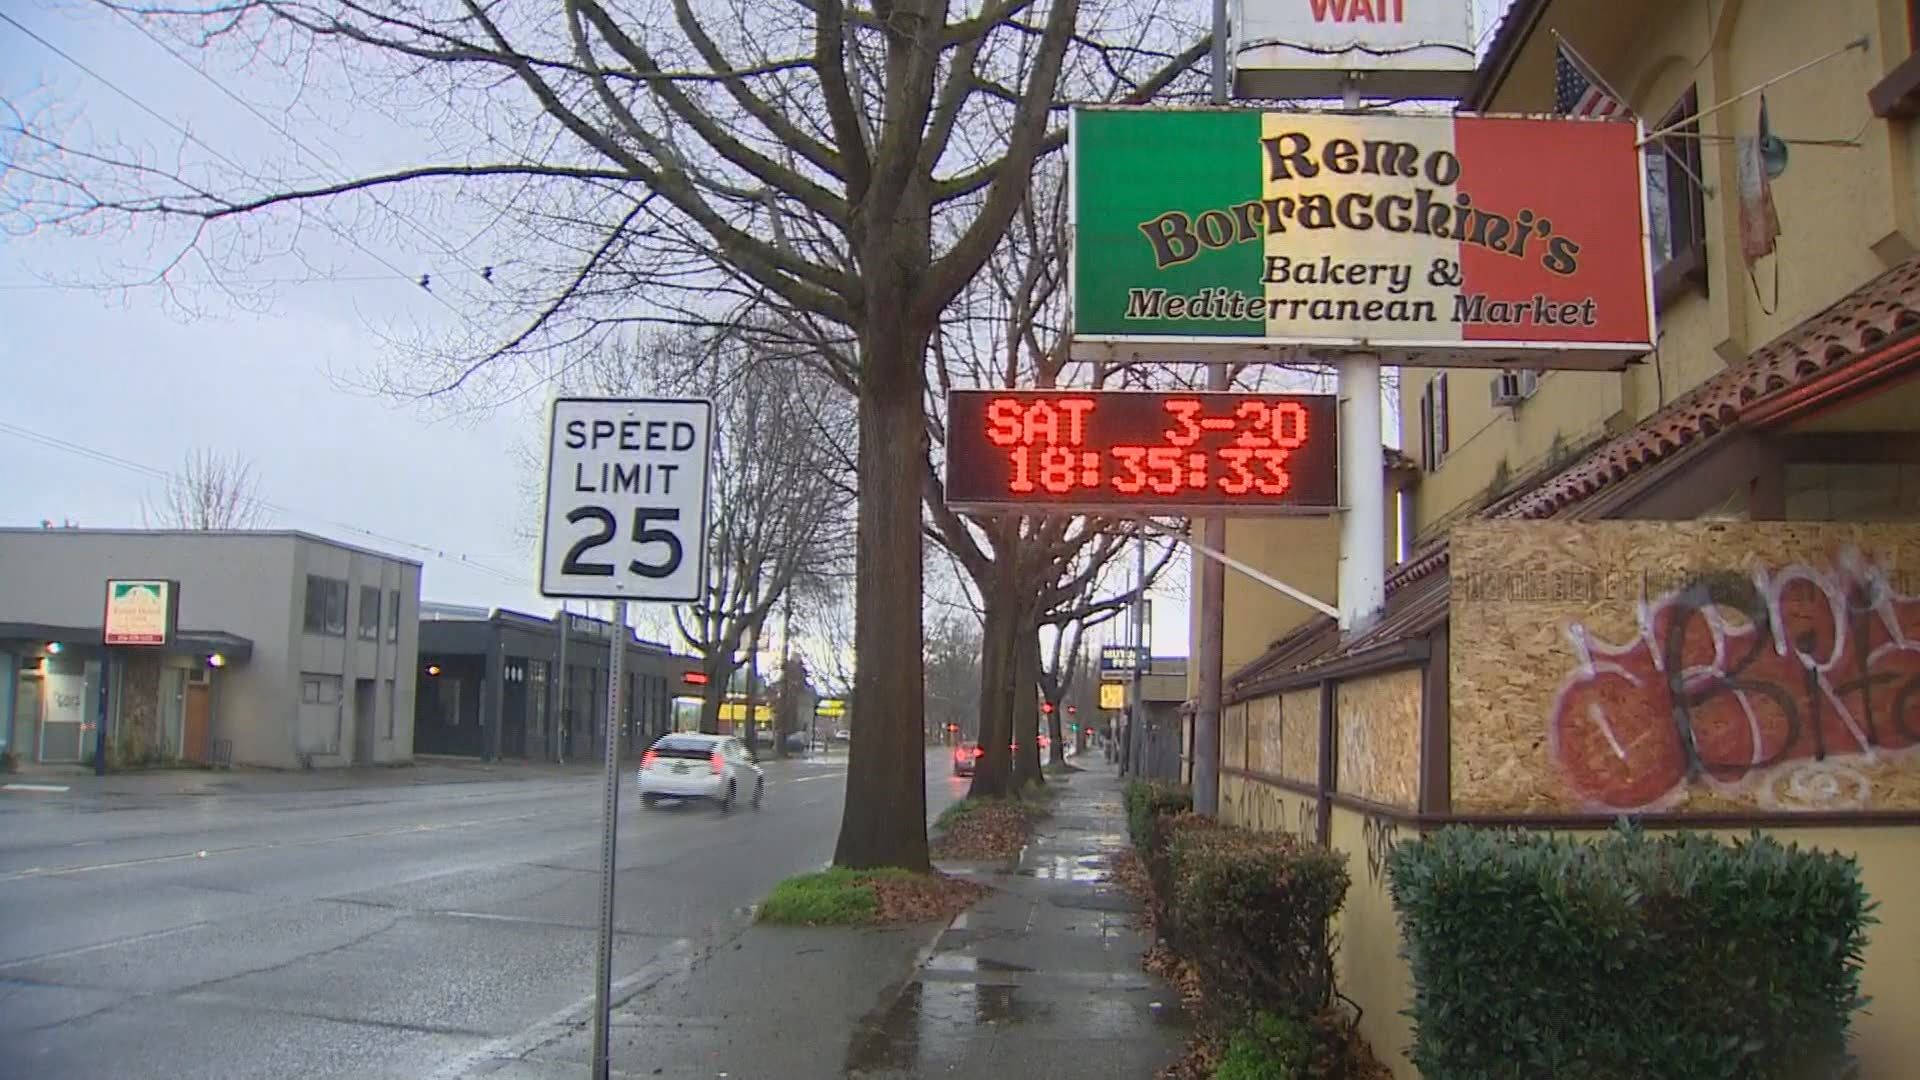 Seattle is losing another institution as Borracchini’s Bakery announced Saturday it would remain permanently closed due to financial losses from the pandemic.